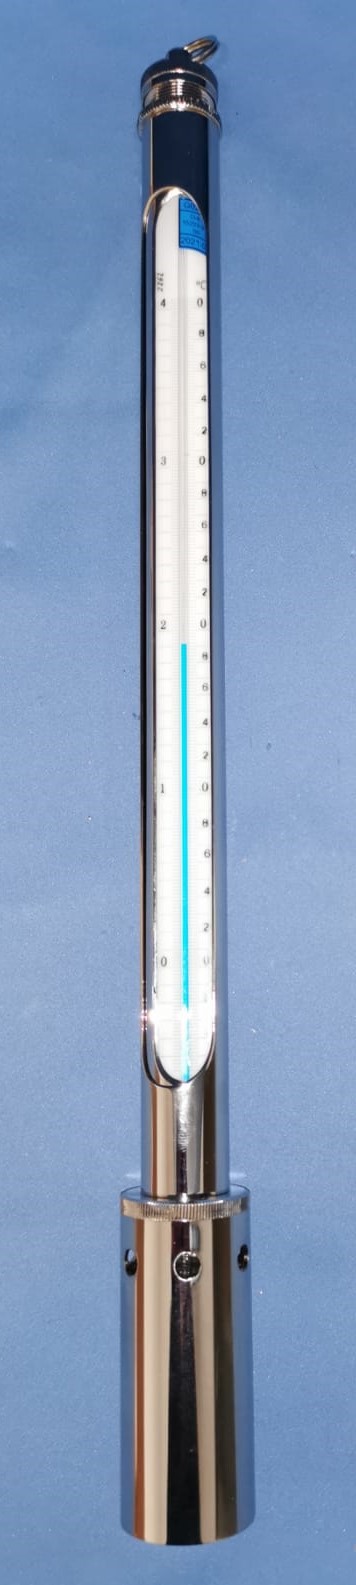 53c - Water Thermometer